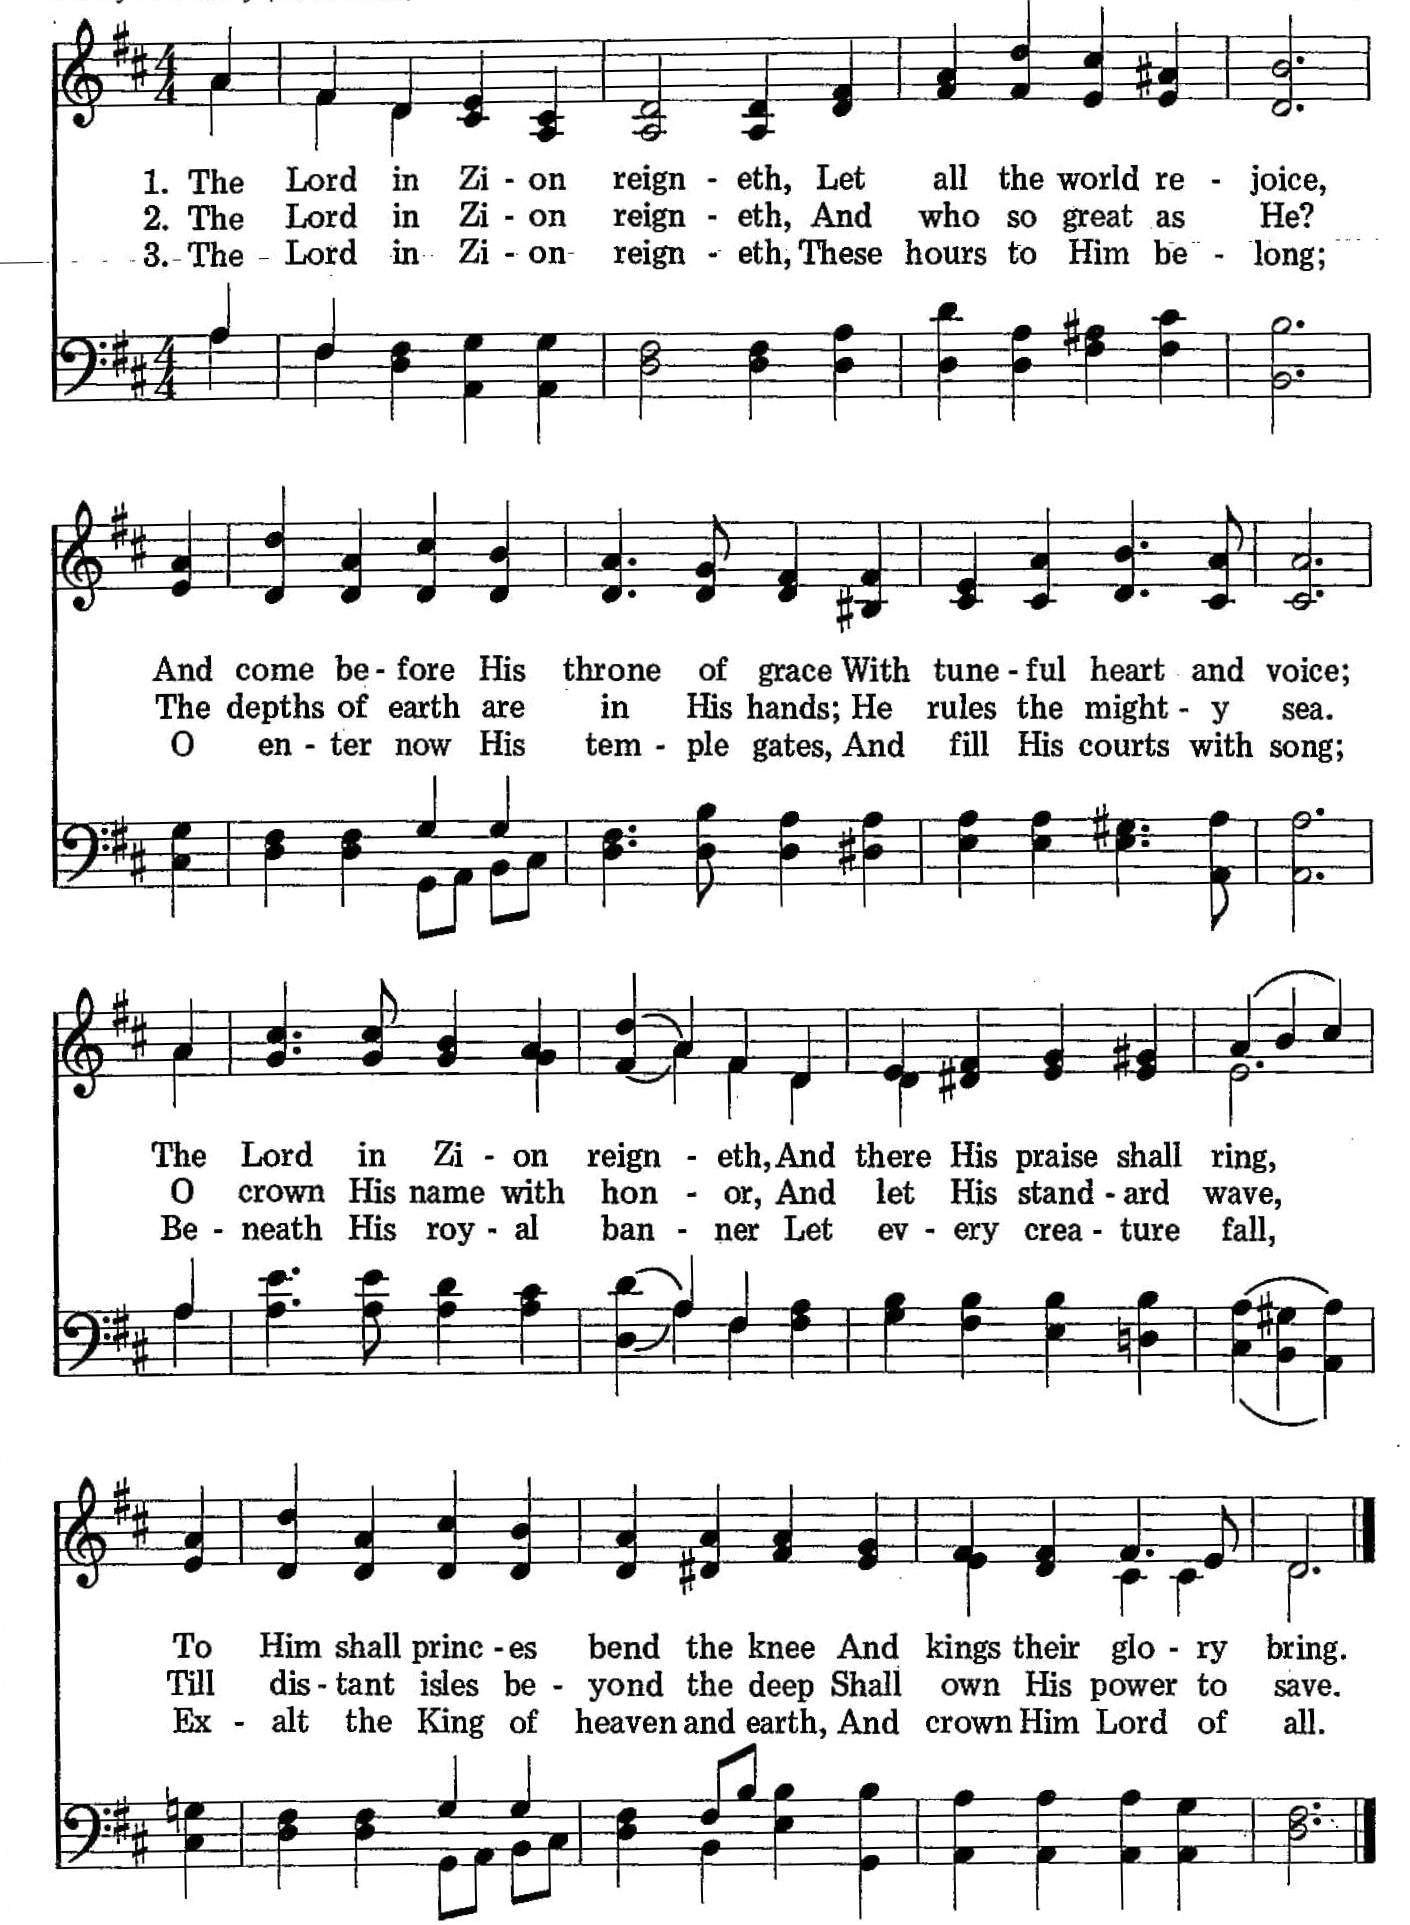 007 – The Lord in Zion Reigneth sheet music